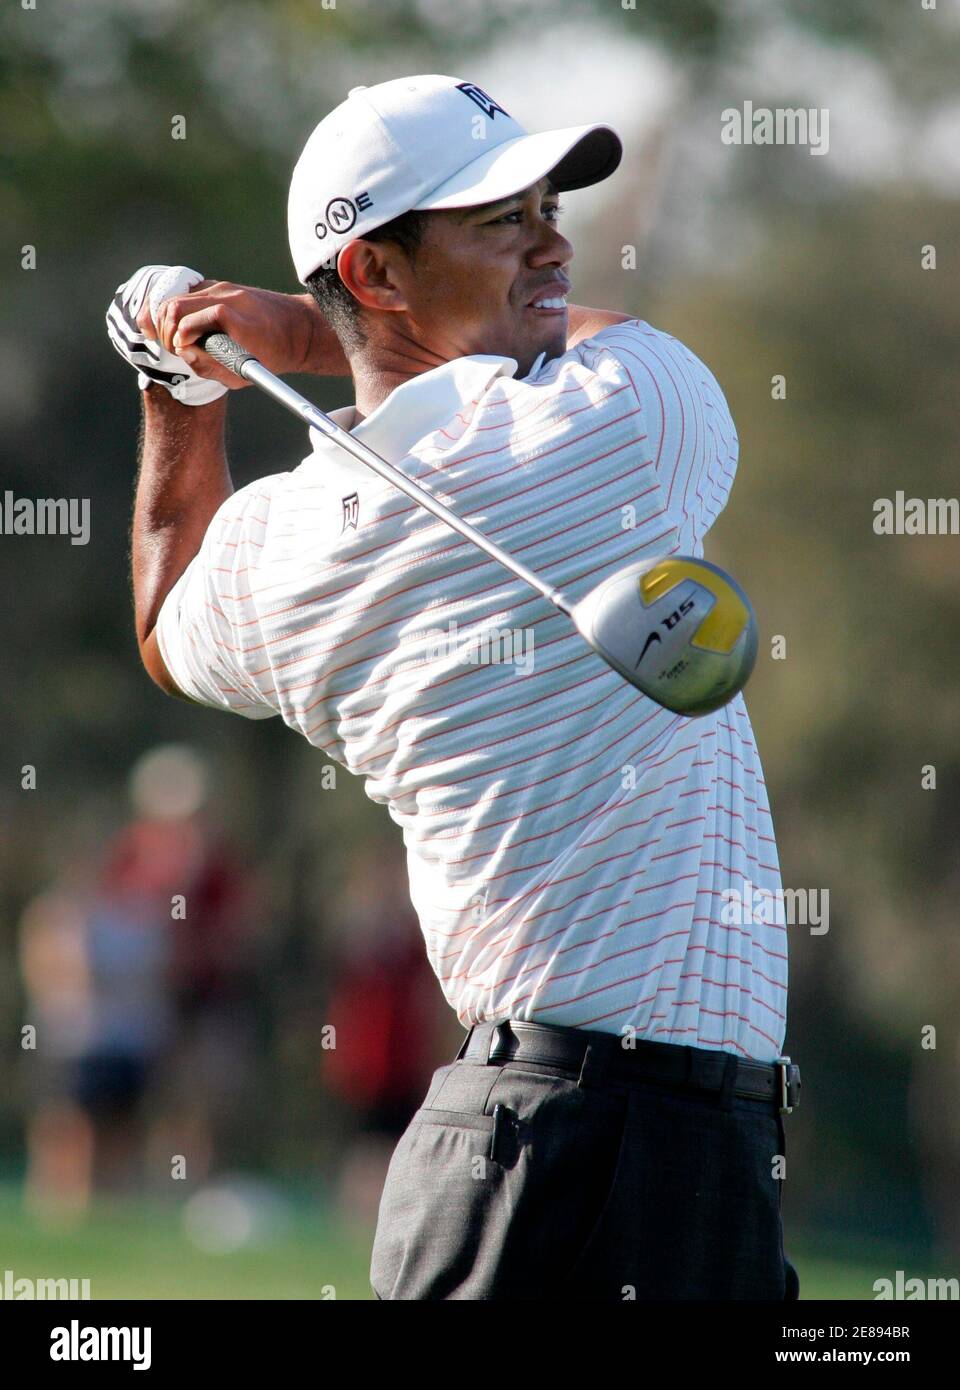 Tiger Woods tees off on the 12th hole during the first round of the Arnold Palmer Invitational golf tournament held at the Bay Hill Club in Orlando, Florida March 15, 2007. REUTERS/Rick Fowler (UNITED STATES) Stock Photo